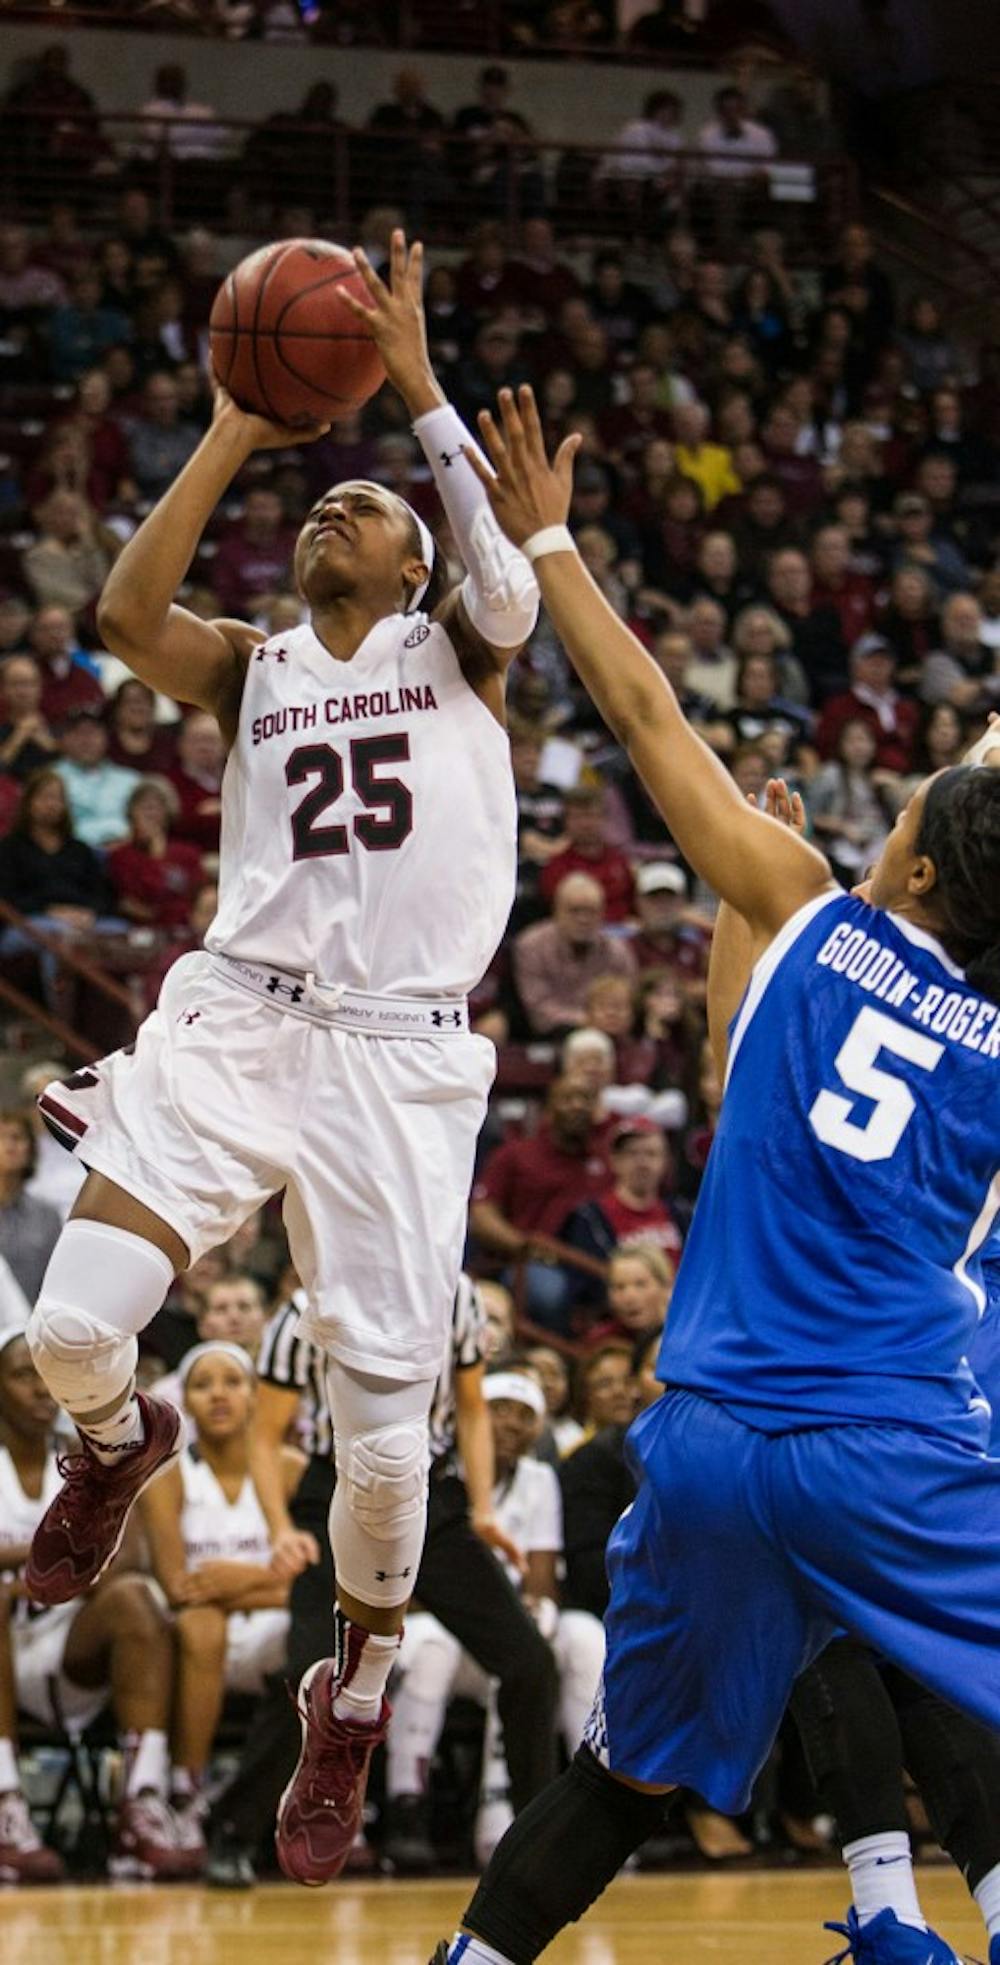 South Carolina&apos;s Tiffany Mitchell (25) shoots over Kentucky&apos;s Kyvin Goodin-Rogers (5) during the first half at the Colonial Life Arena in Columbia, S.C., on Sunday, Jan. 11. 2015. South Carolina won, 68-60. (Tracy Glantz/The State/TNS)